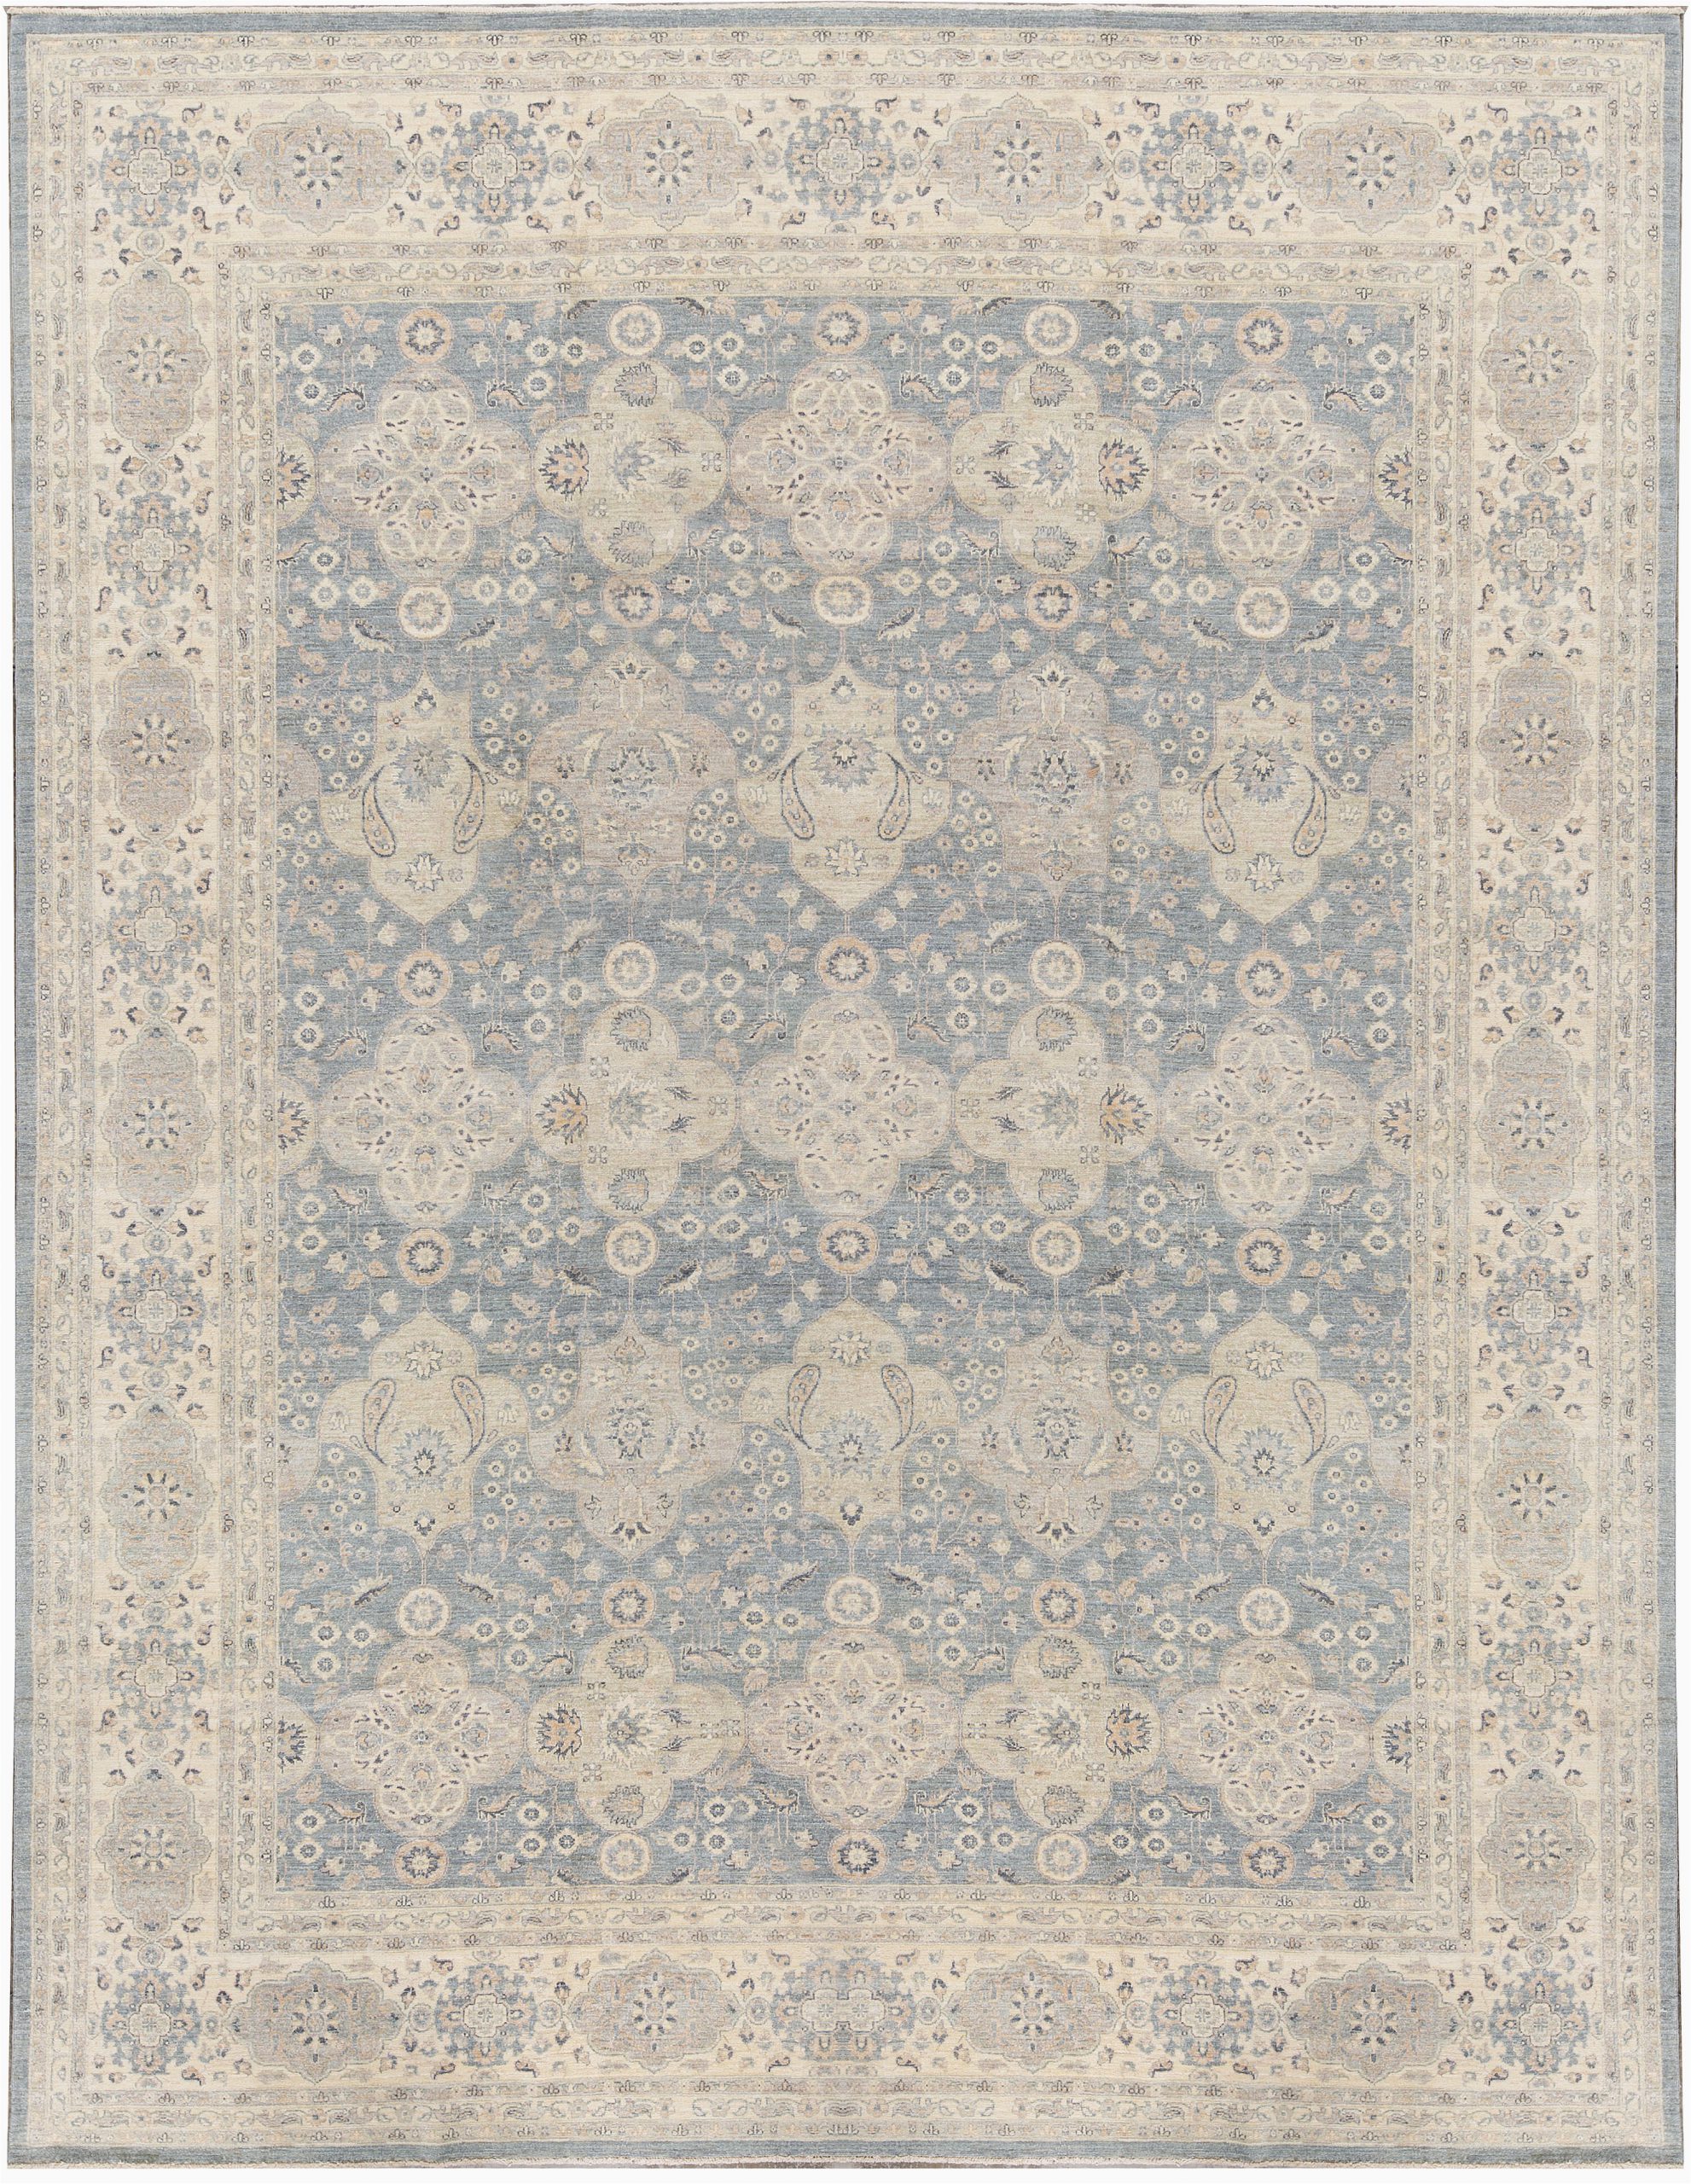 7 X 14 area Rug E Of A Kind Hand Knotted Beige 11 6" X 14 7" Wool area Rug